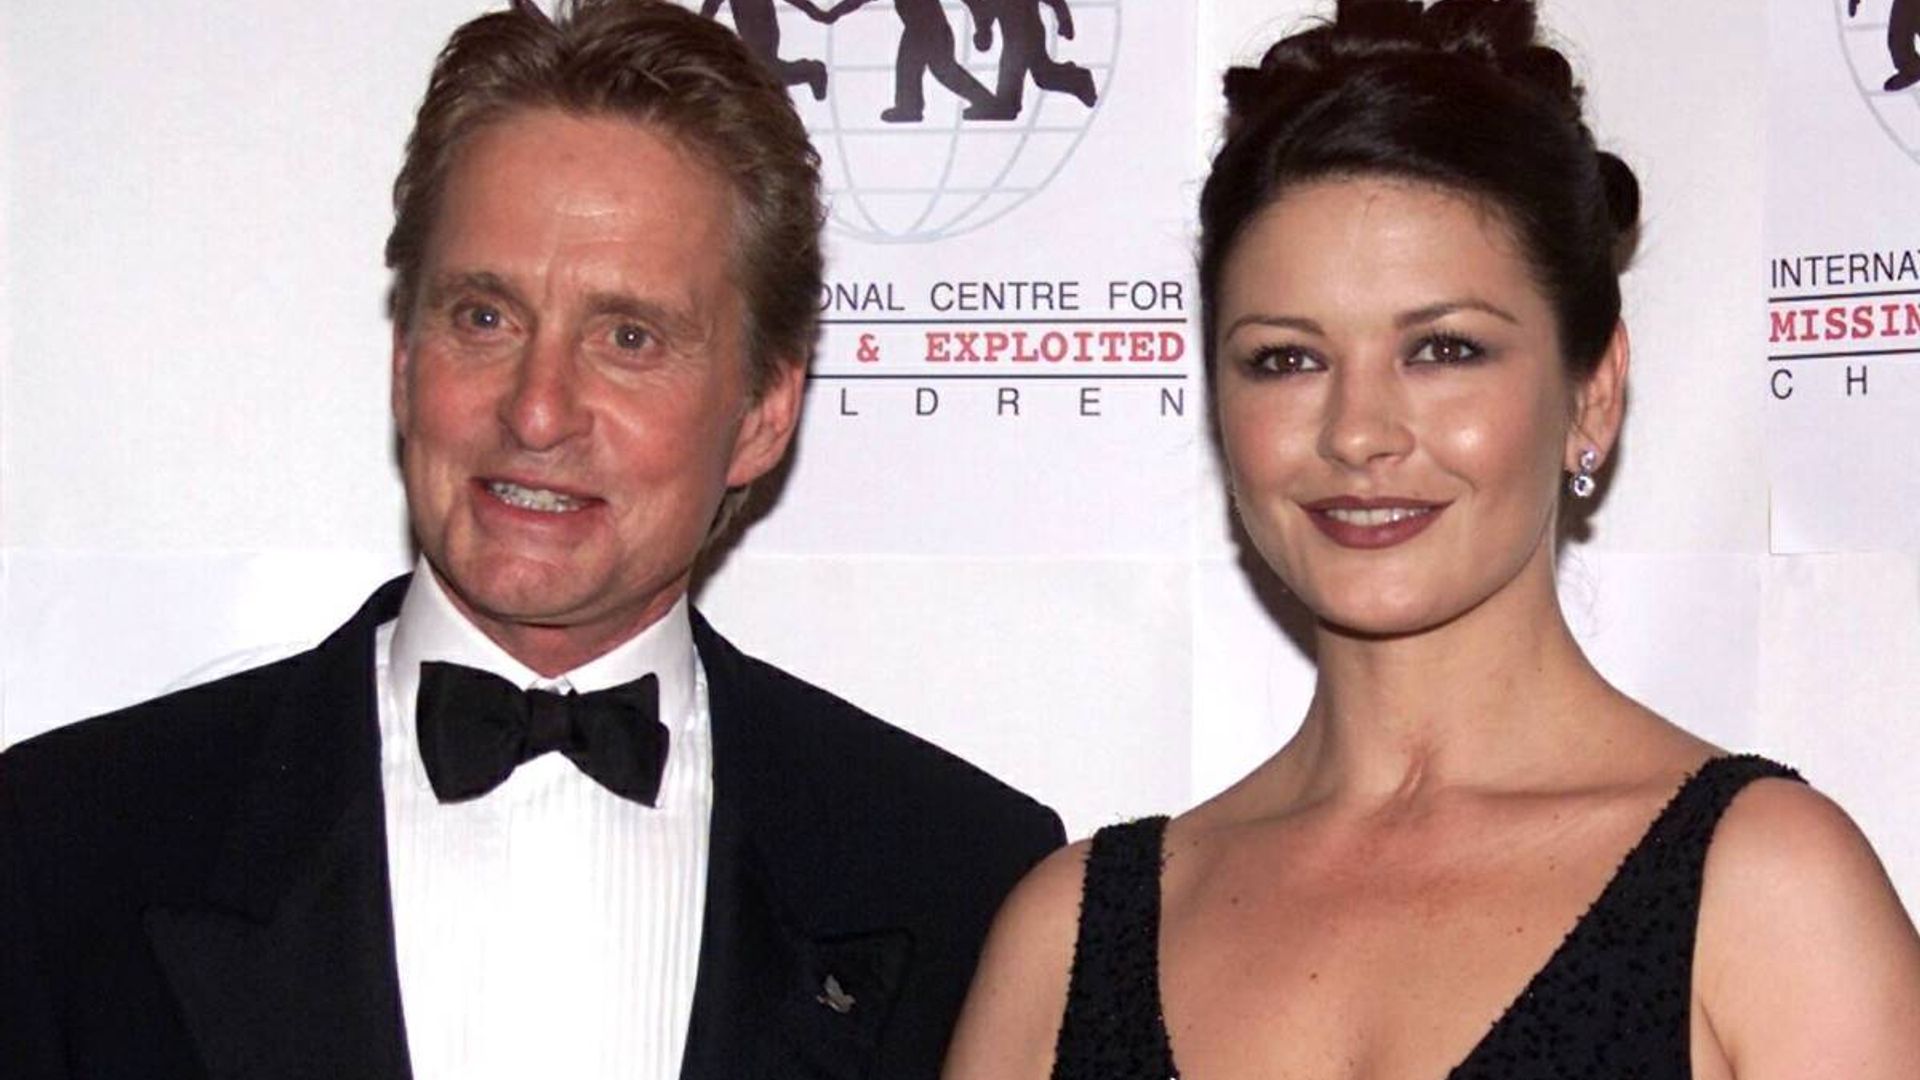 Michael Douglas’ fans react to his youthful appearance in photo with Catherine Zeta-Jones